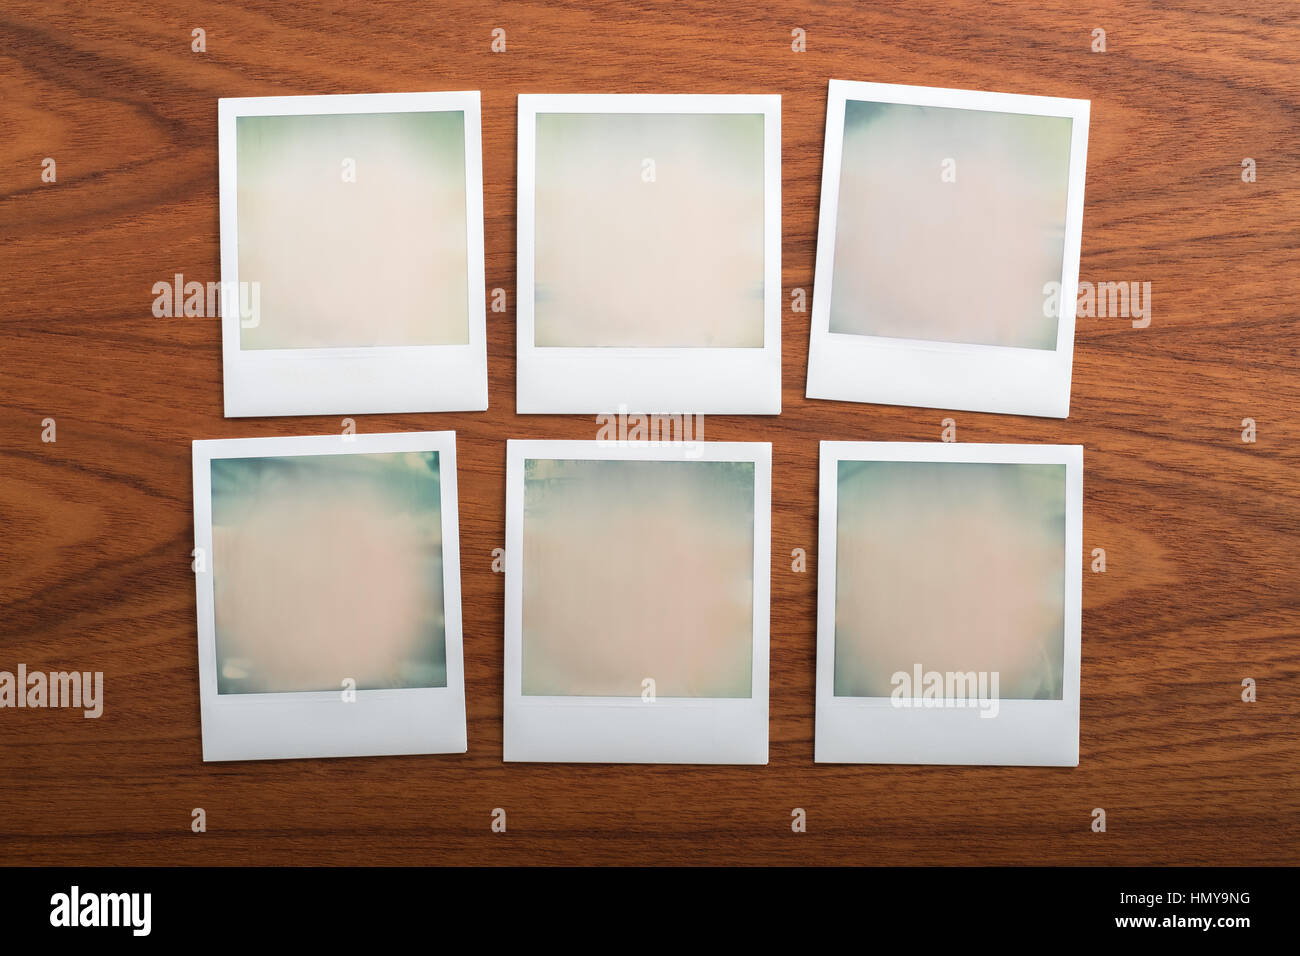 Blank instant print photographs on wooden table. Six Objects. Stock Photo